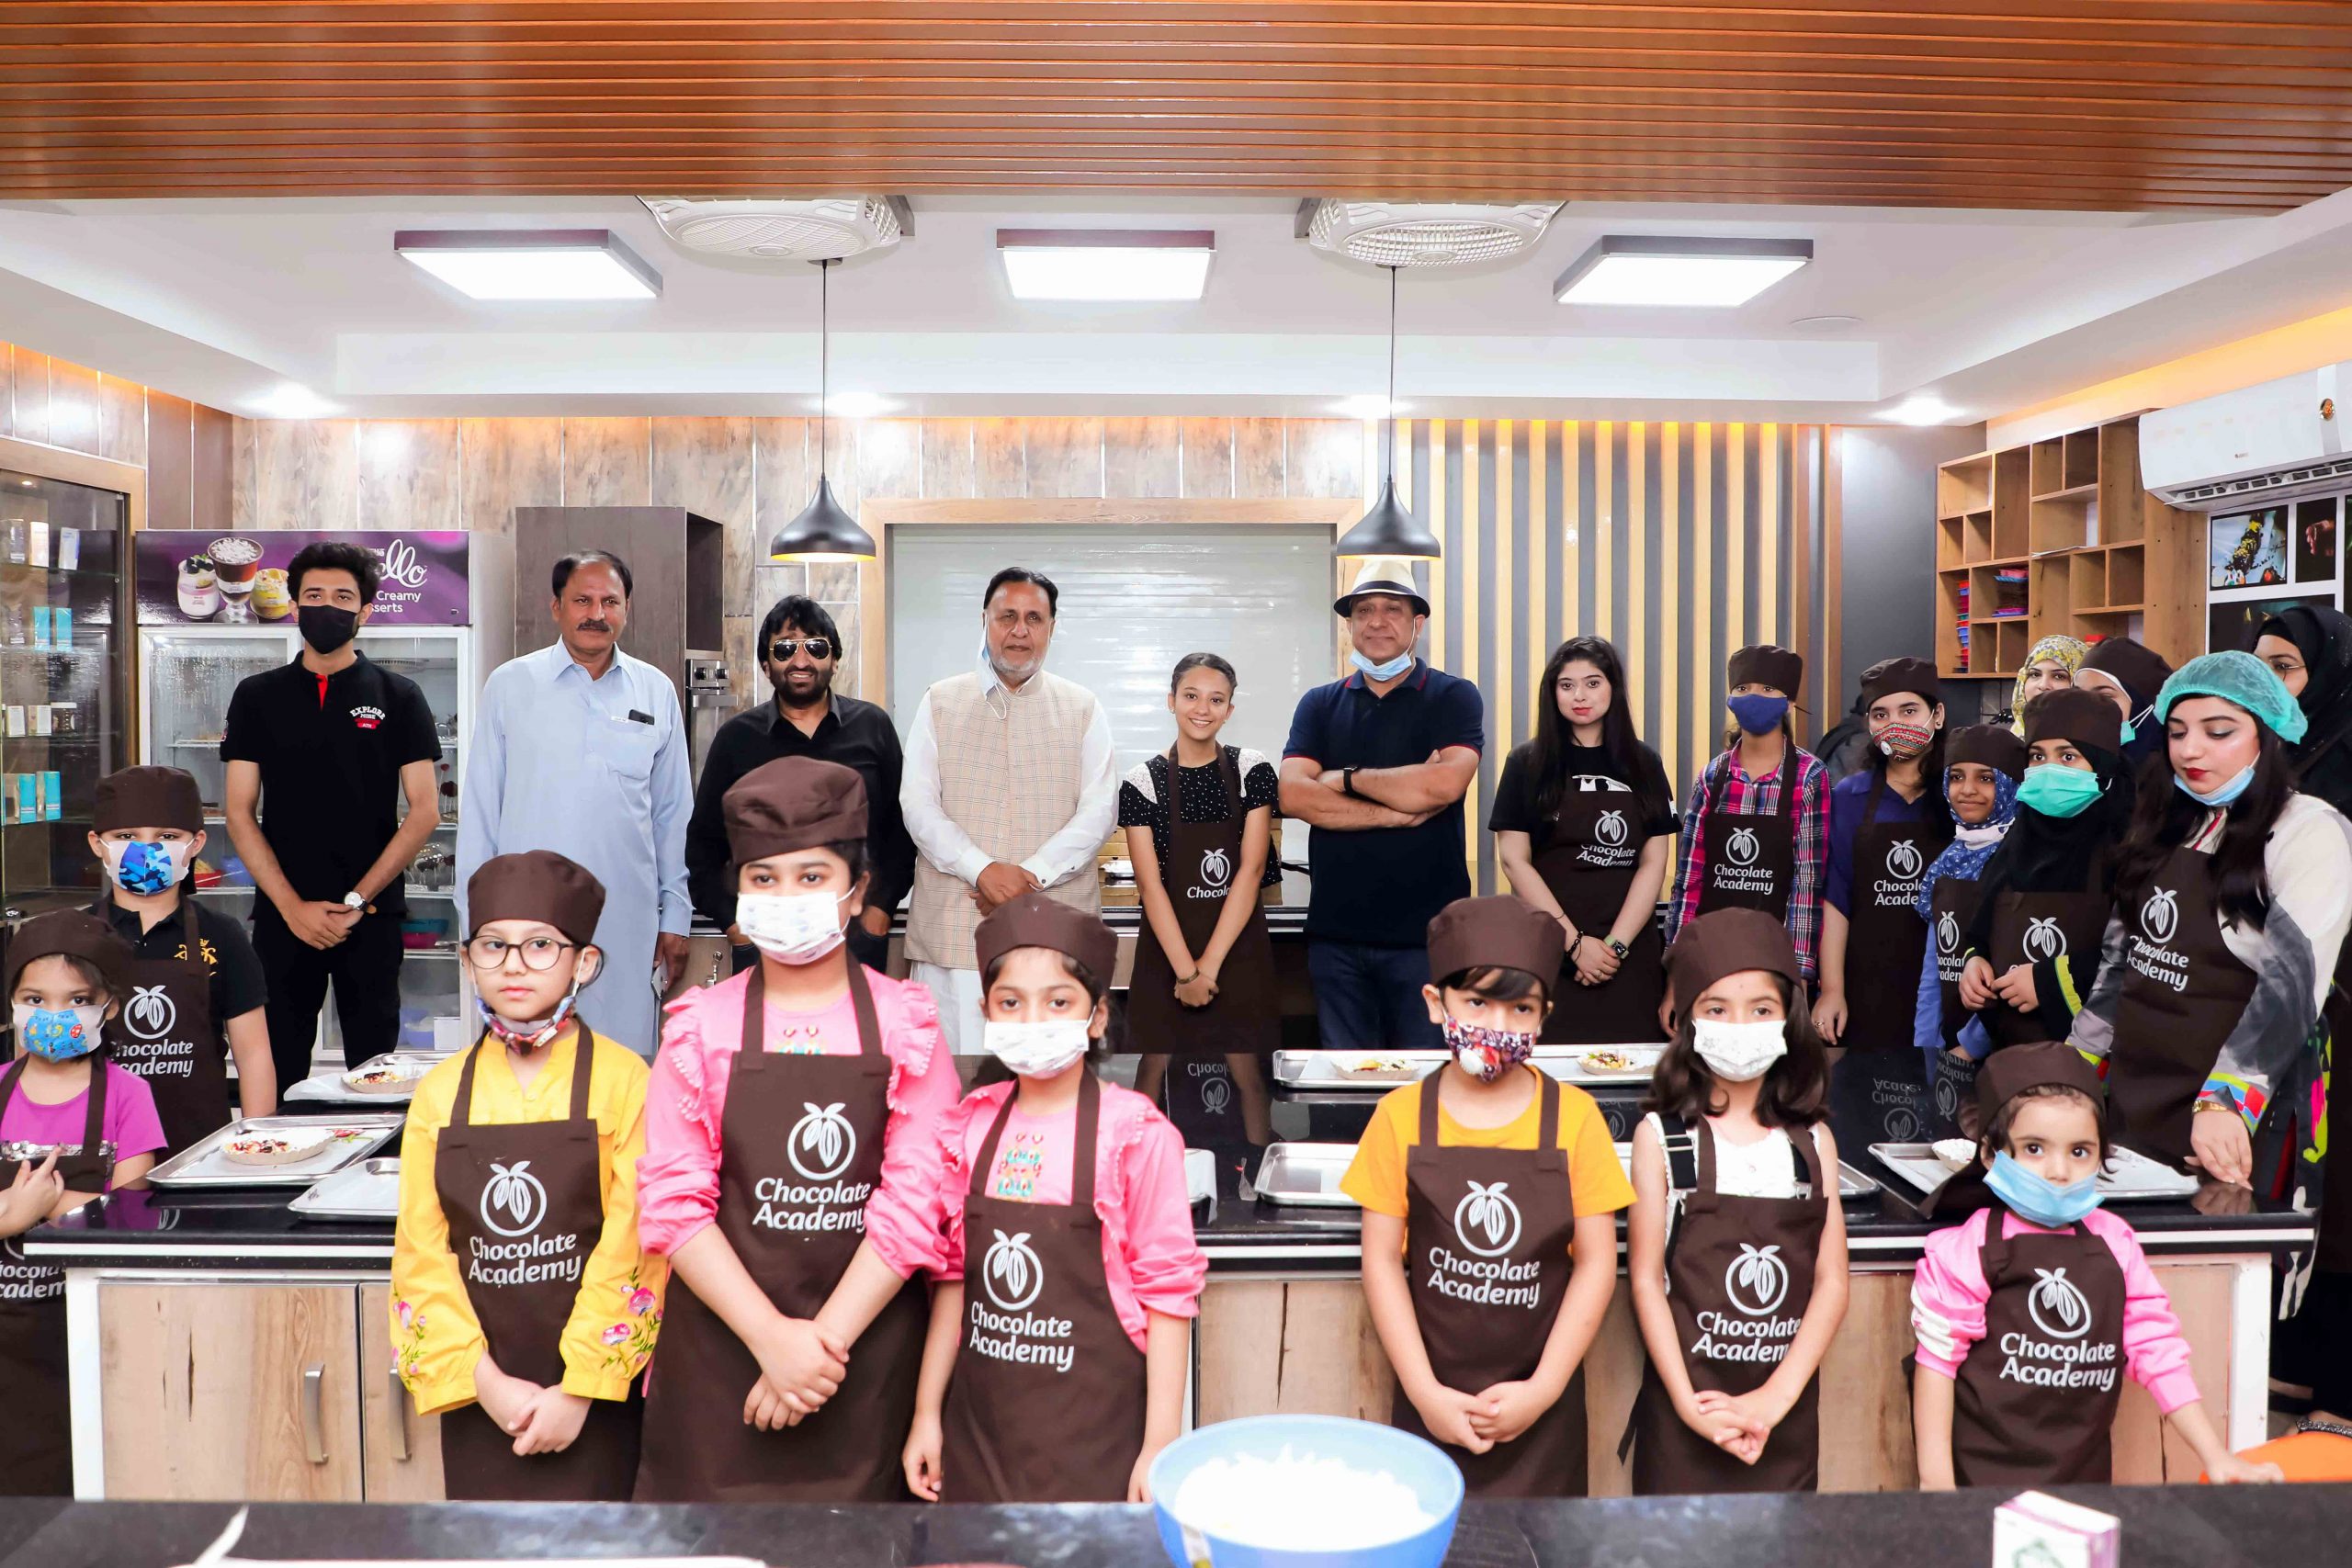 Yet another action-packed workshop at Chocolate Academy